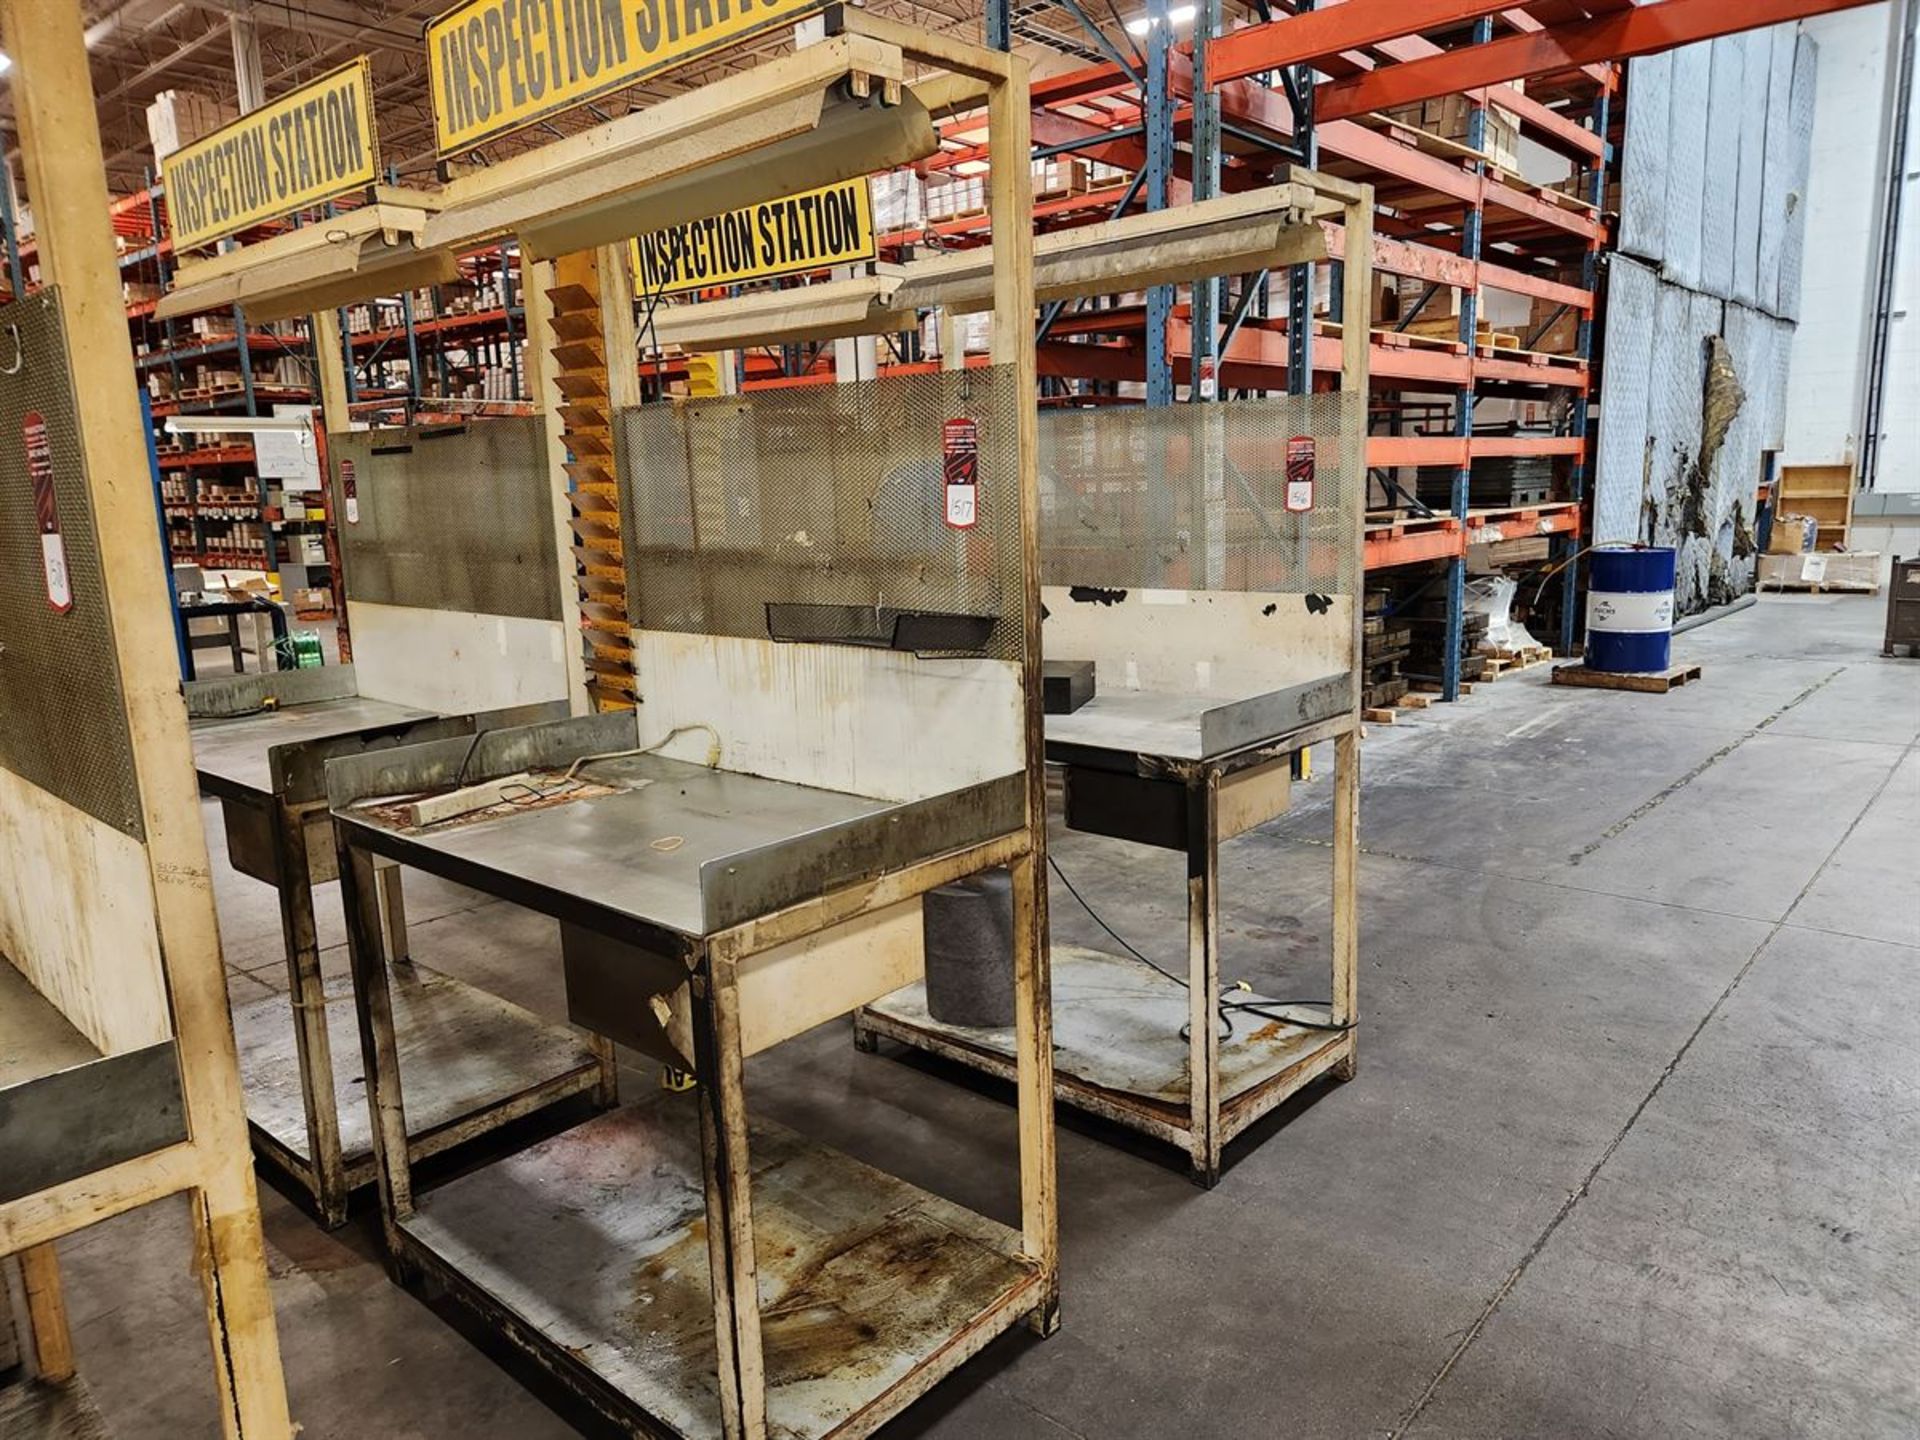 Inspection Table 48" x 30"